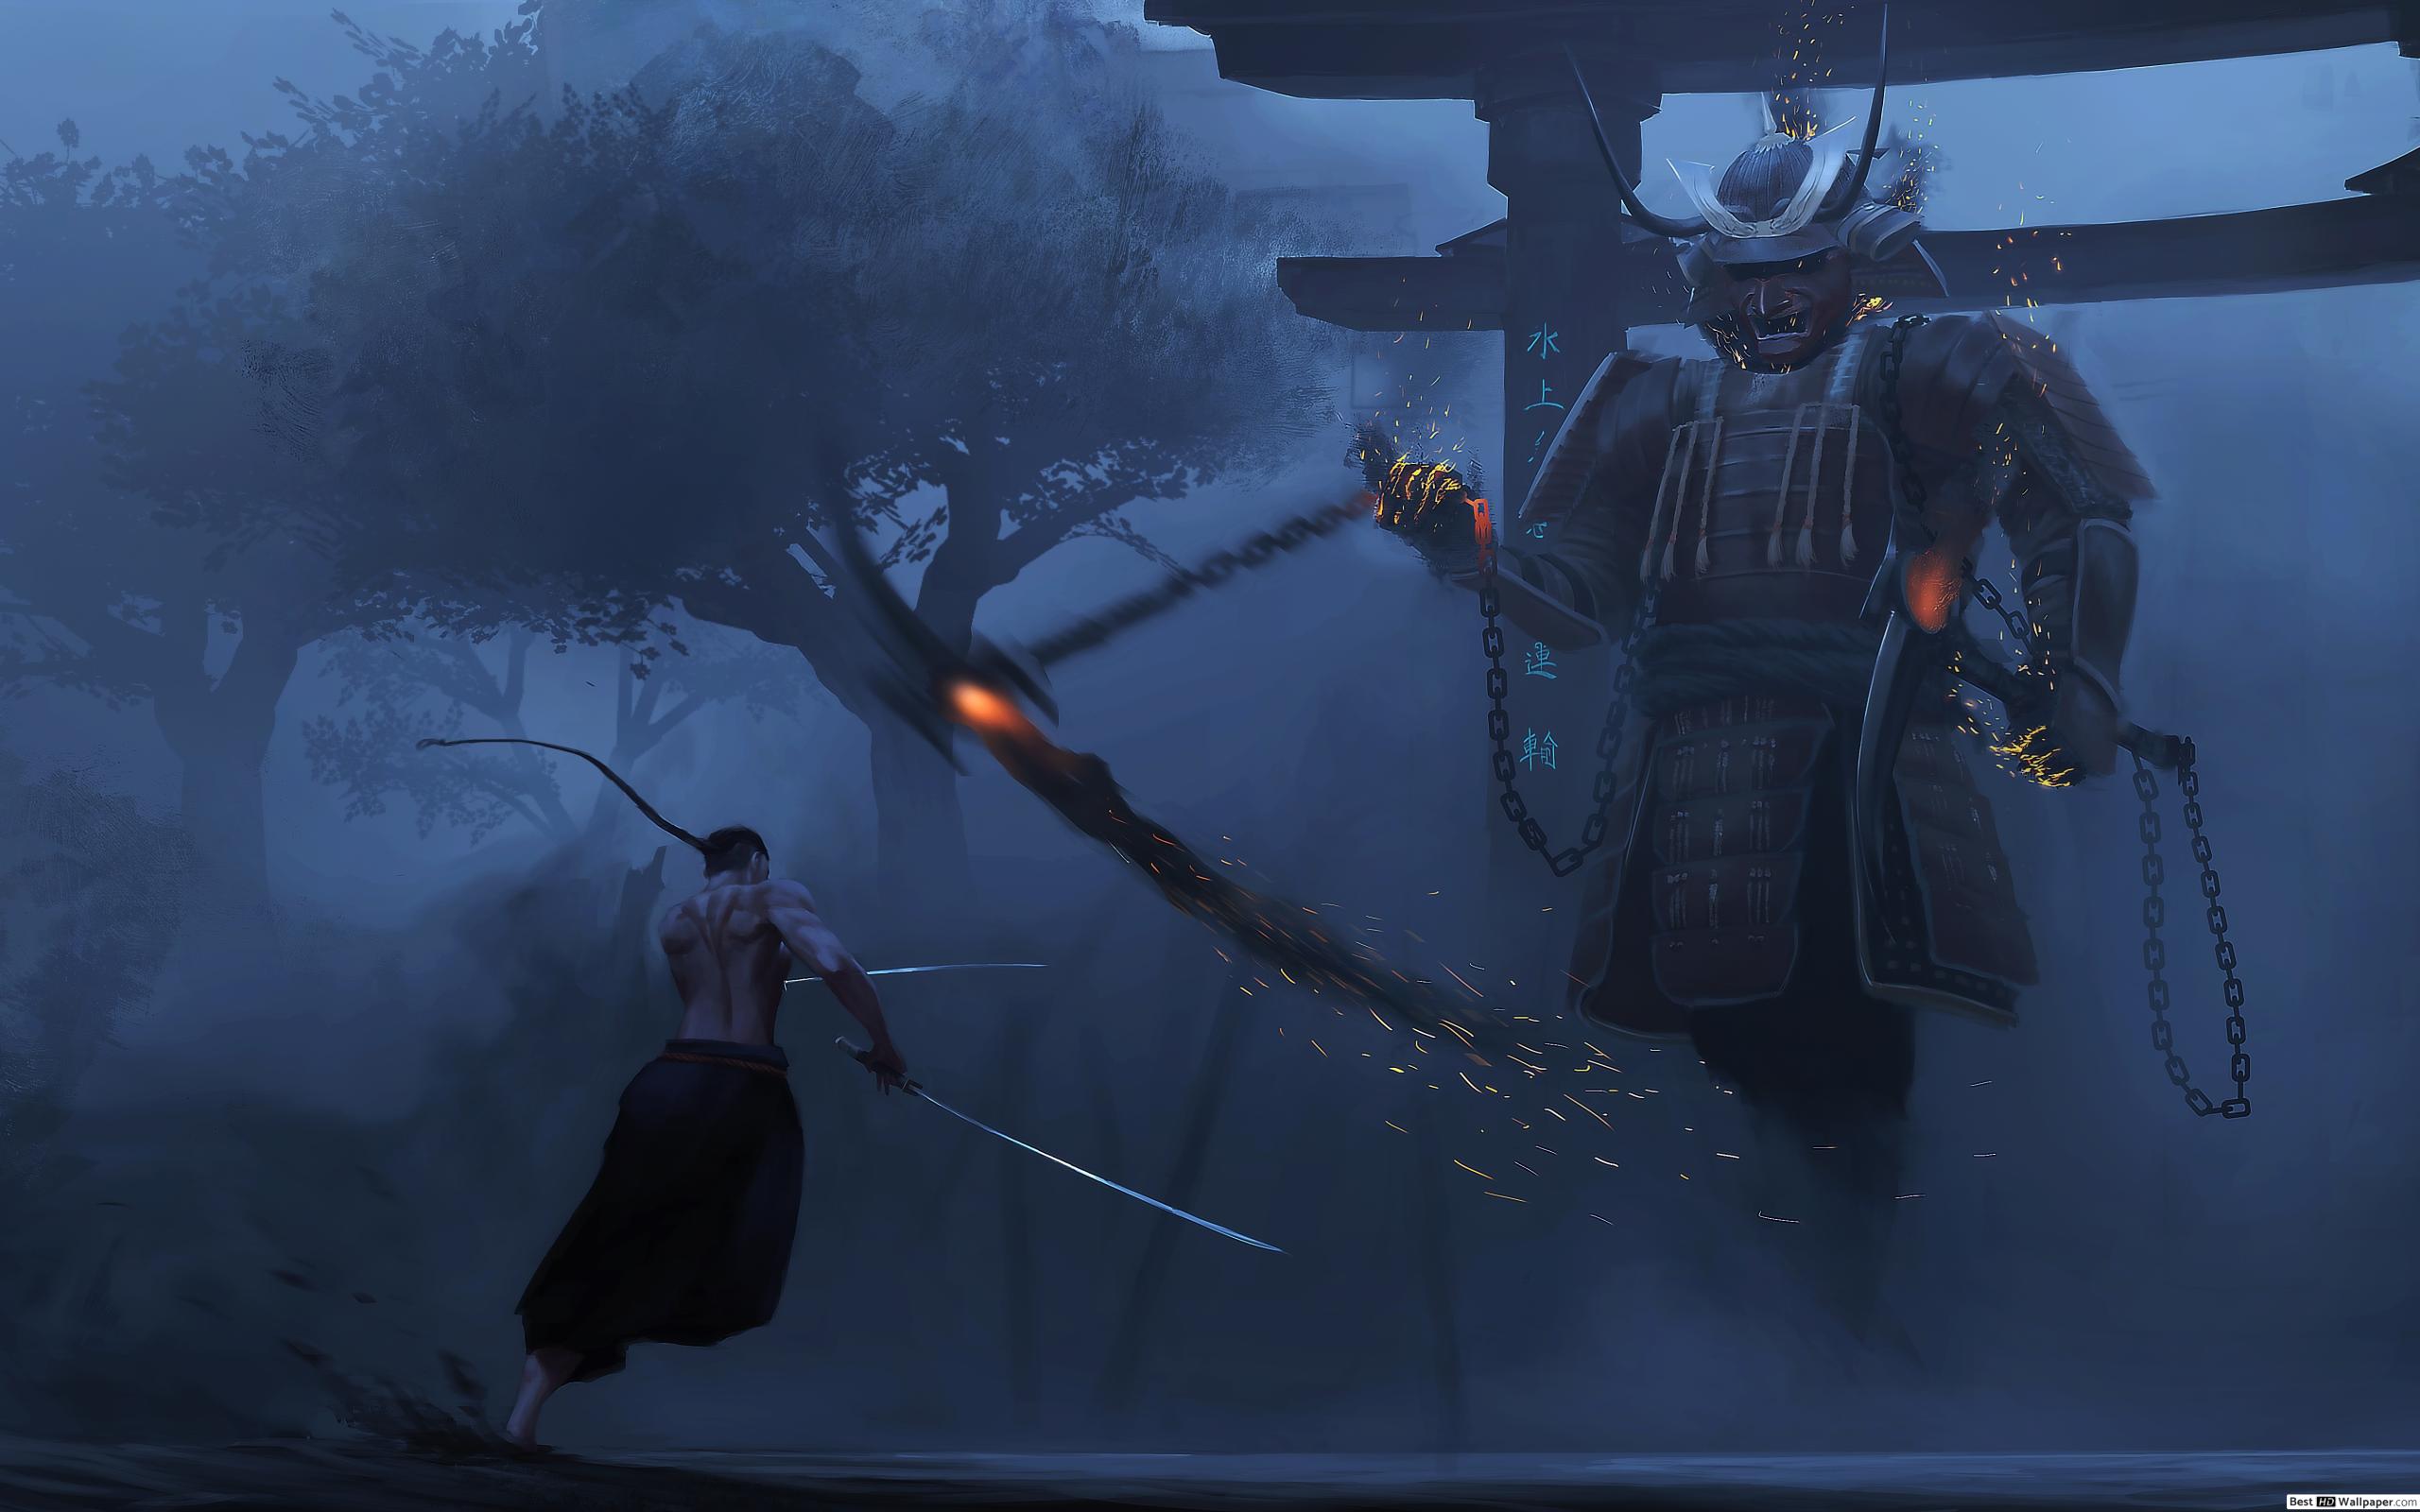 310+ Fantasy Samurai HD Wallpapers and Backgrounds